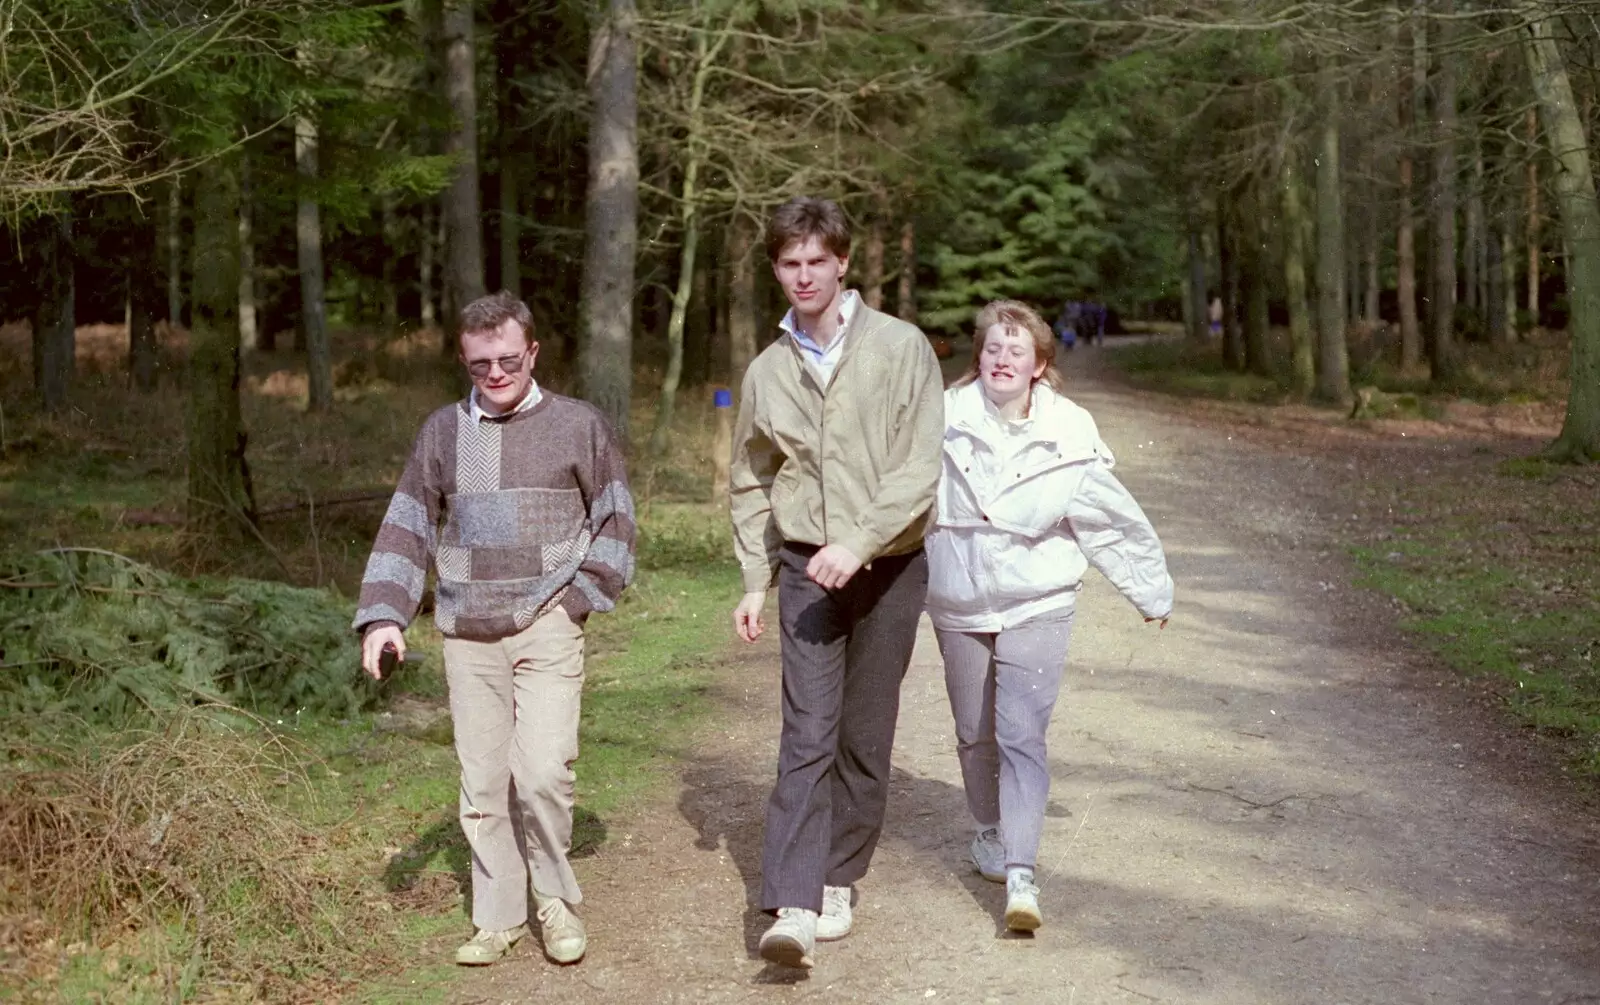 Hamish, Sean and Maria in the New Forest, from A Walk in the New Forest, Hampshire - 27th July 1989